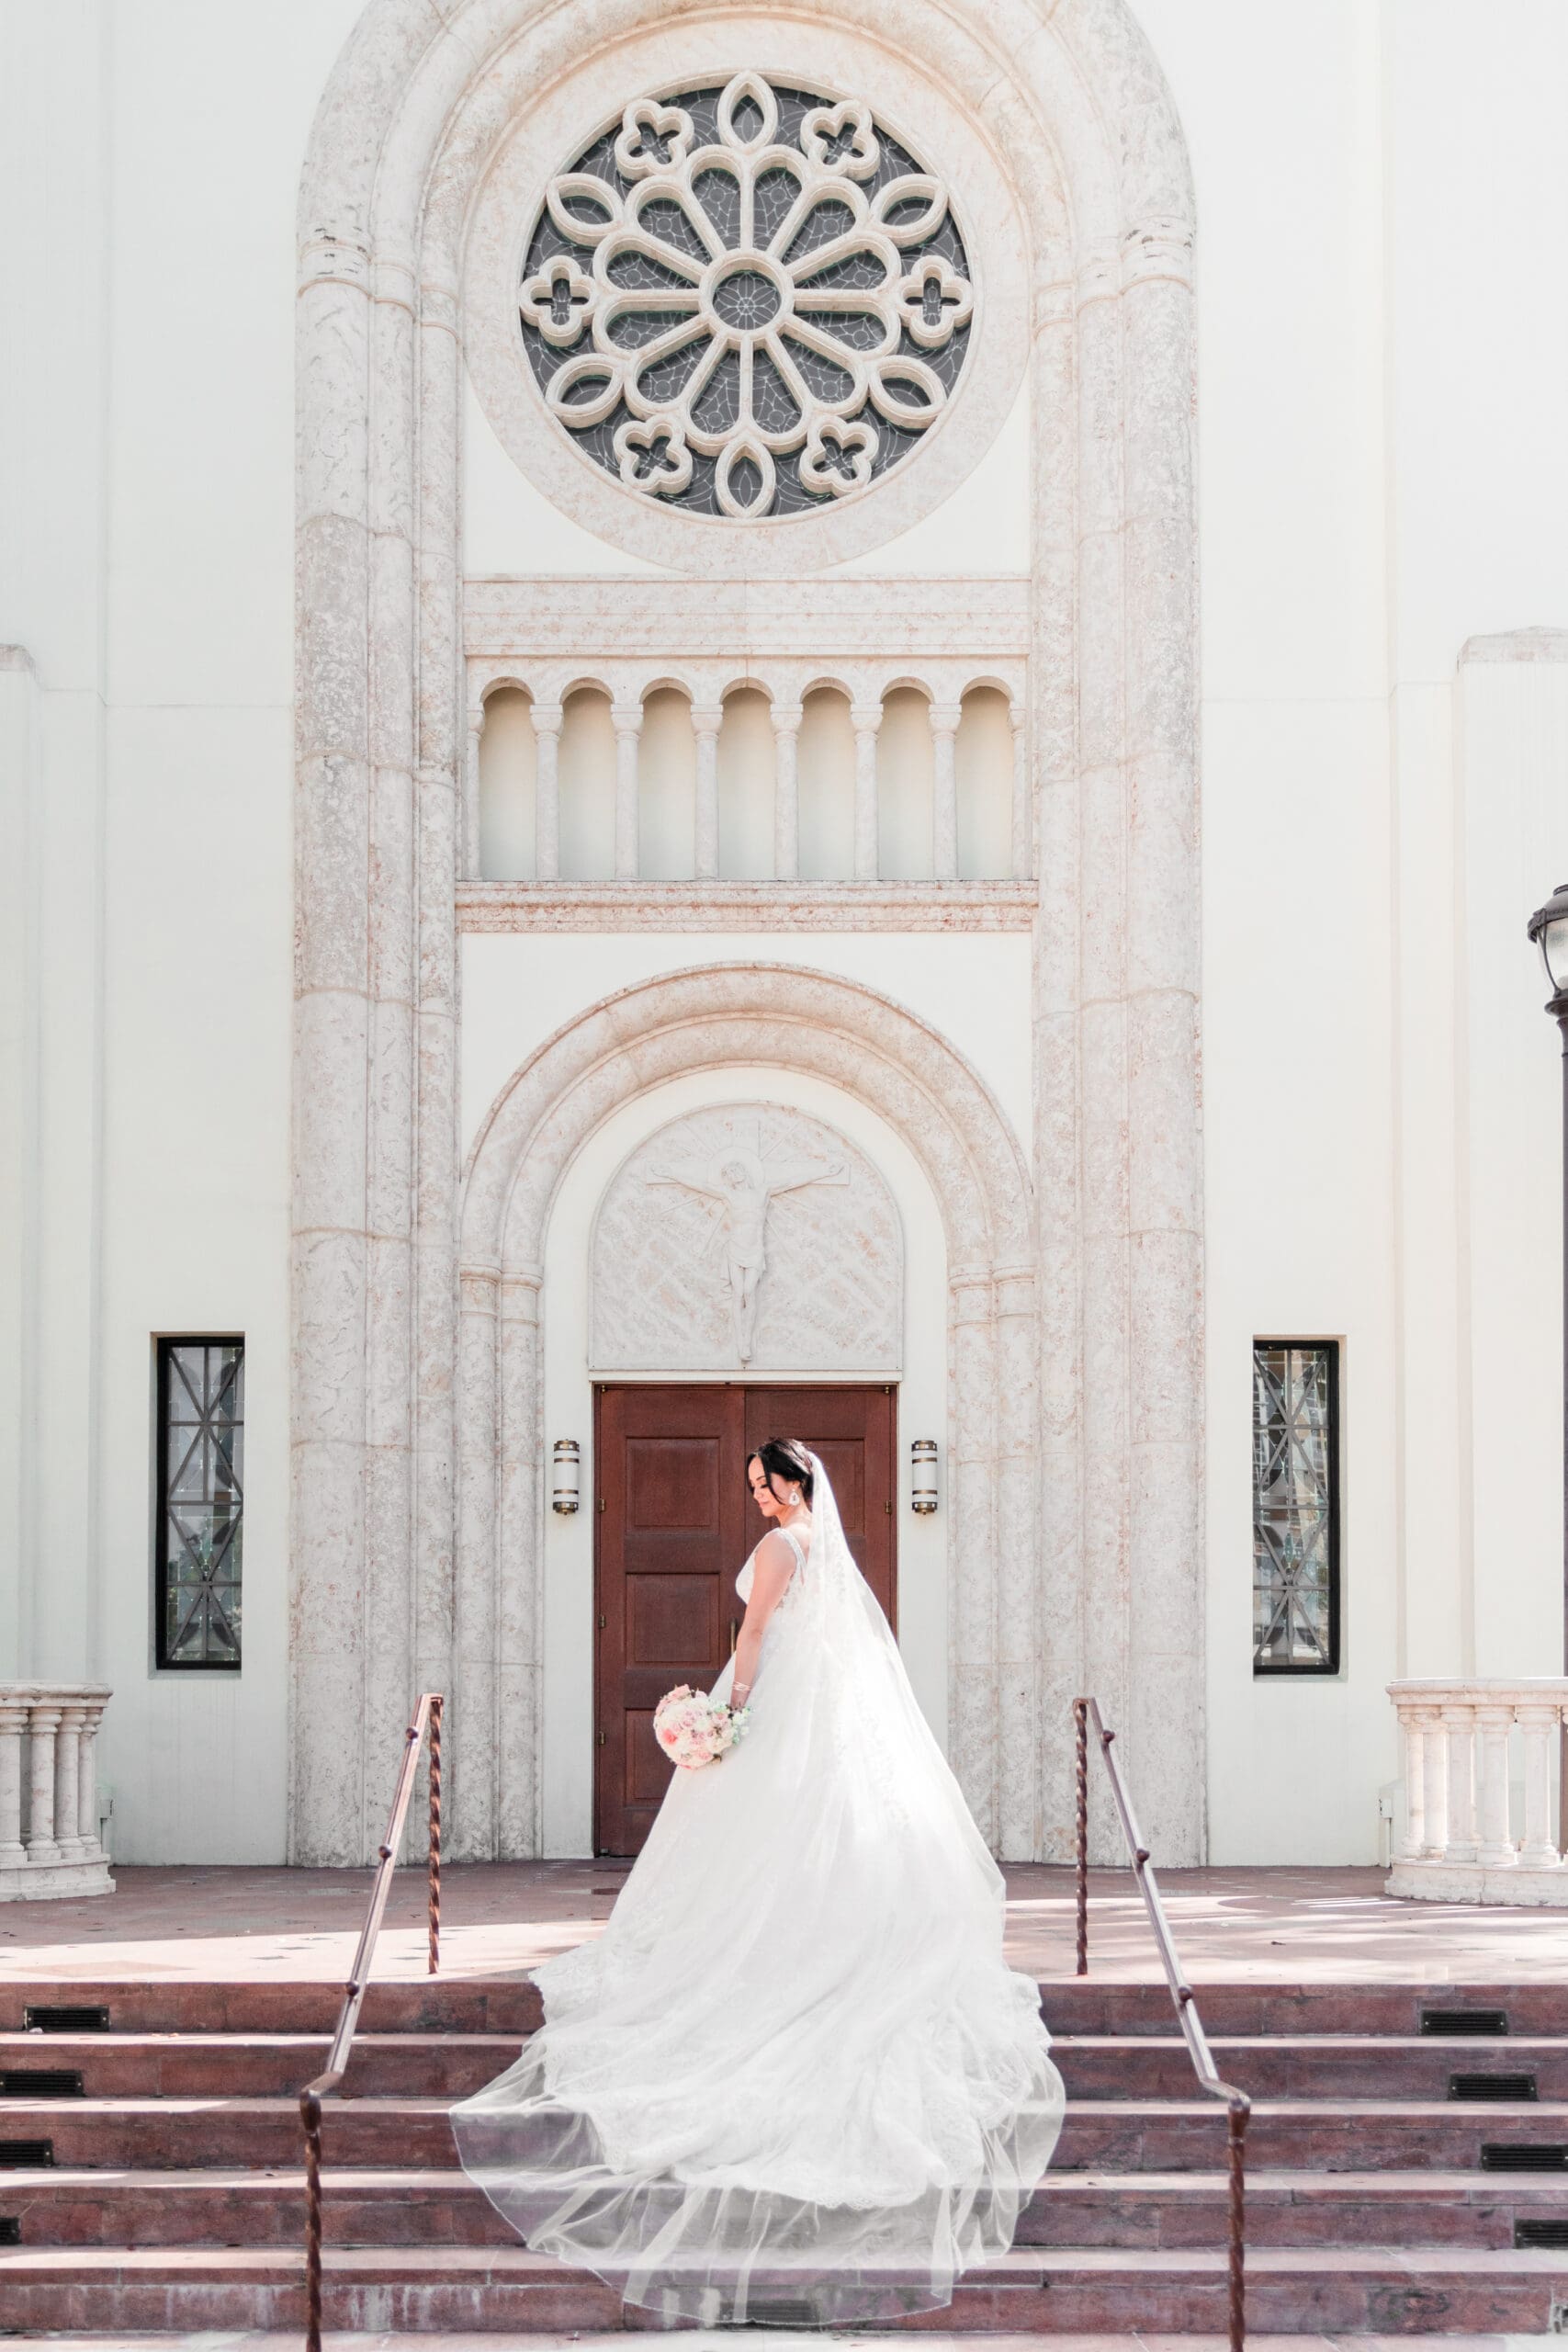 Jessica standing alone in front of St. James Cathedral, her dress flowing gracefully down the steps.